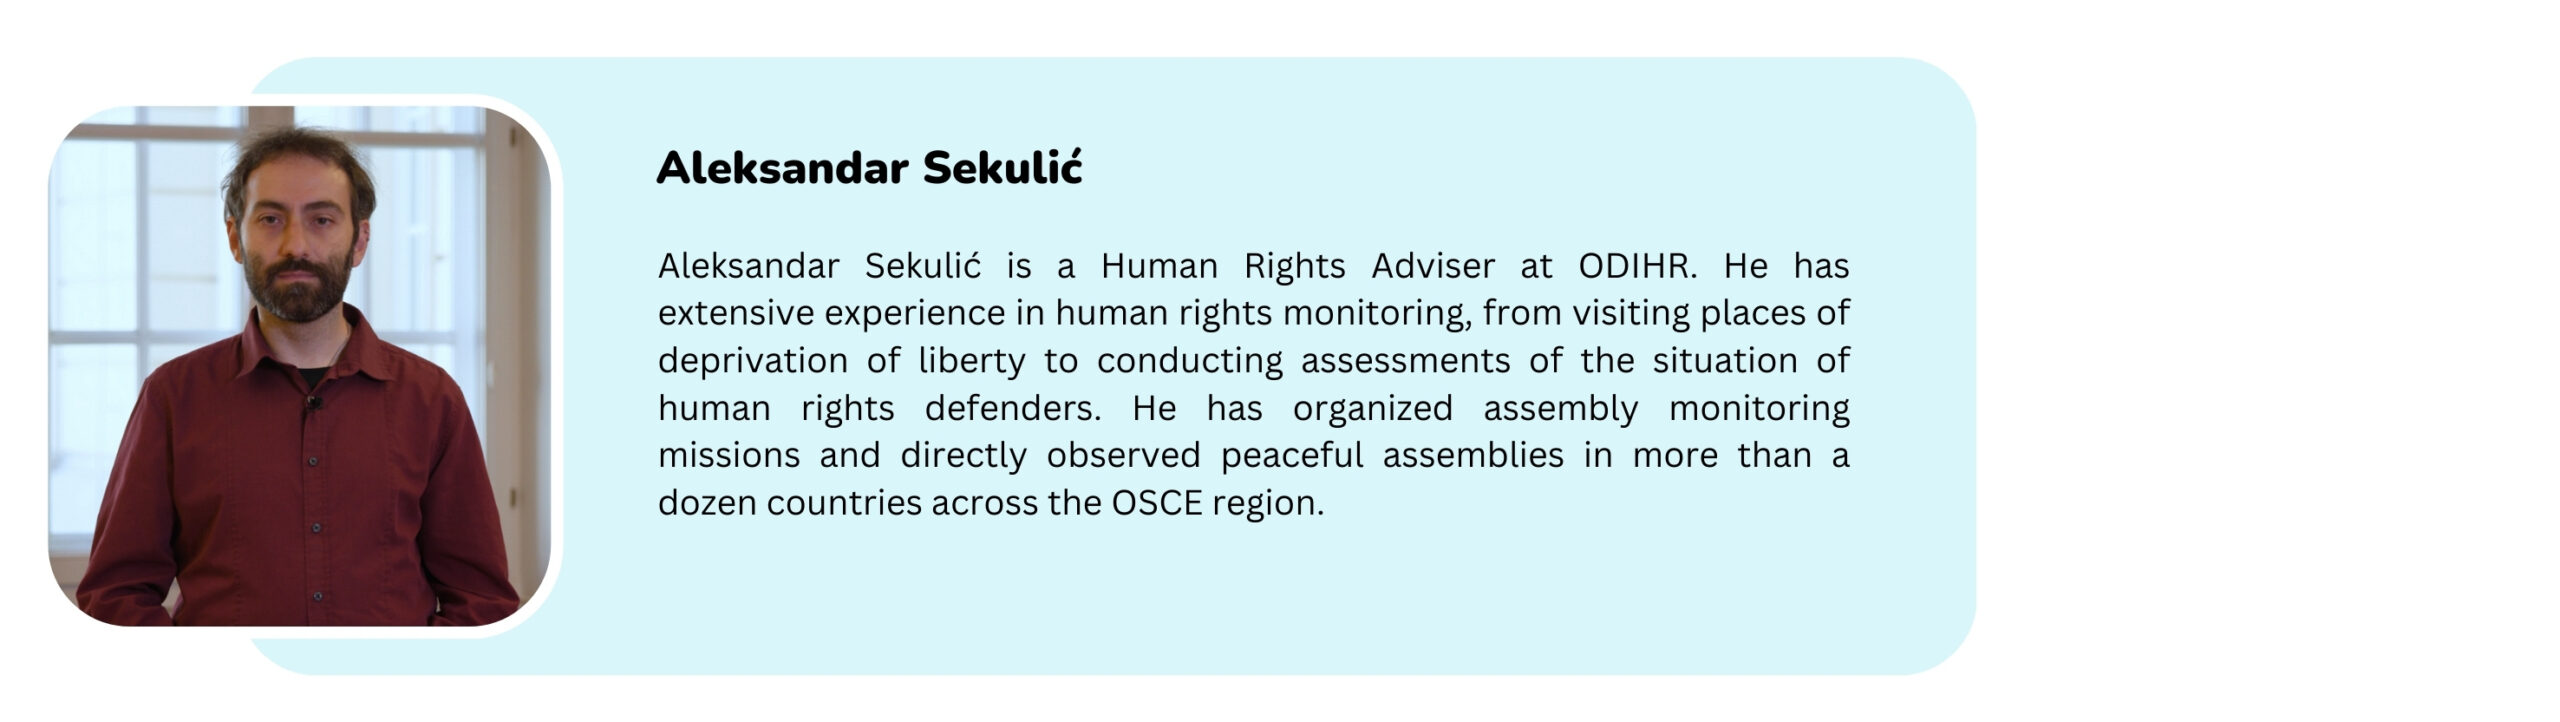 Picture of a trainer with the text "Aleksandar Sekulić is a Human Rights Adviser at ODIHR. He has extensive experience in human rights monitoring,from visiting places of deprivation of liberty to conducting assessments of the situation of human rights defenders. He has organized assembly monitoring missions and directly observed peaceful assemblies in more than a dozen countries across the OSCE region."